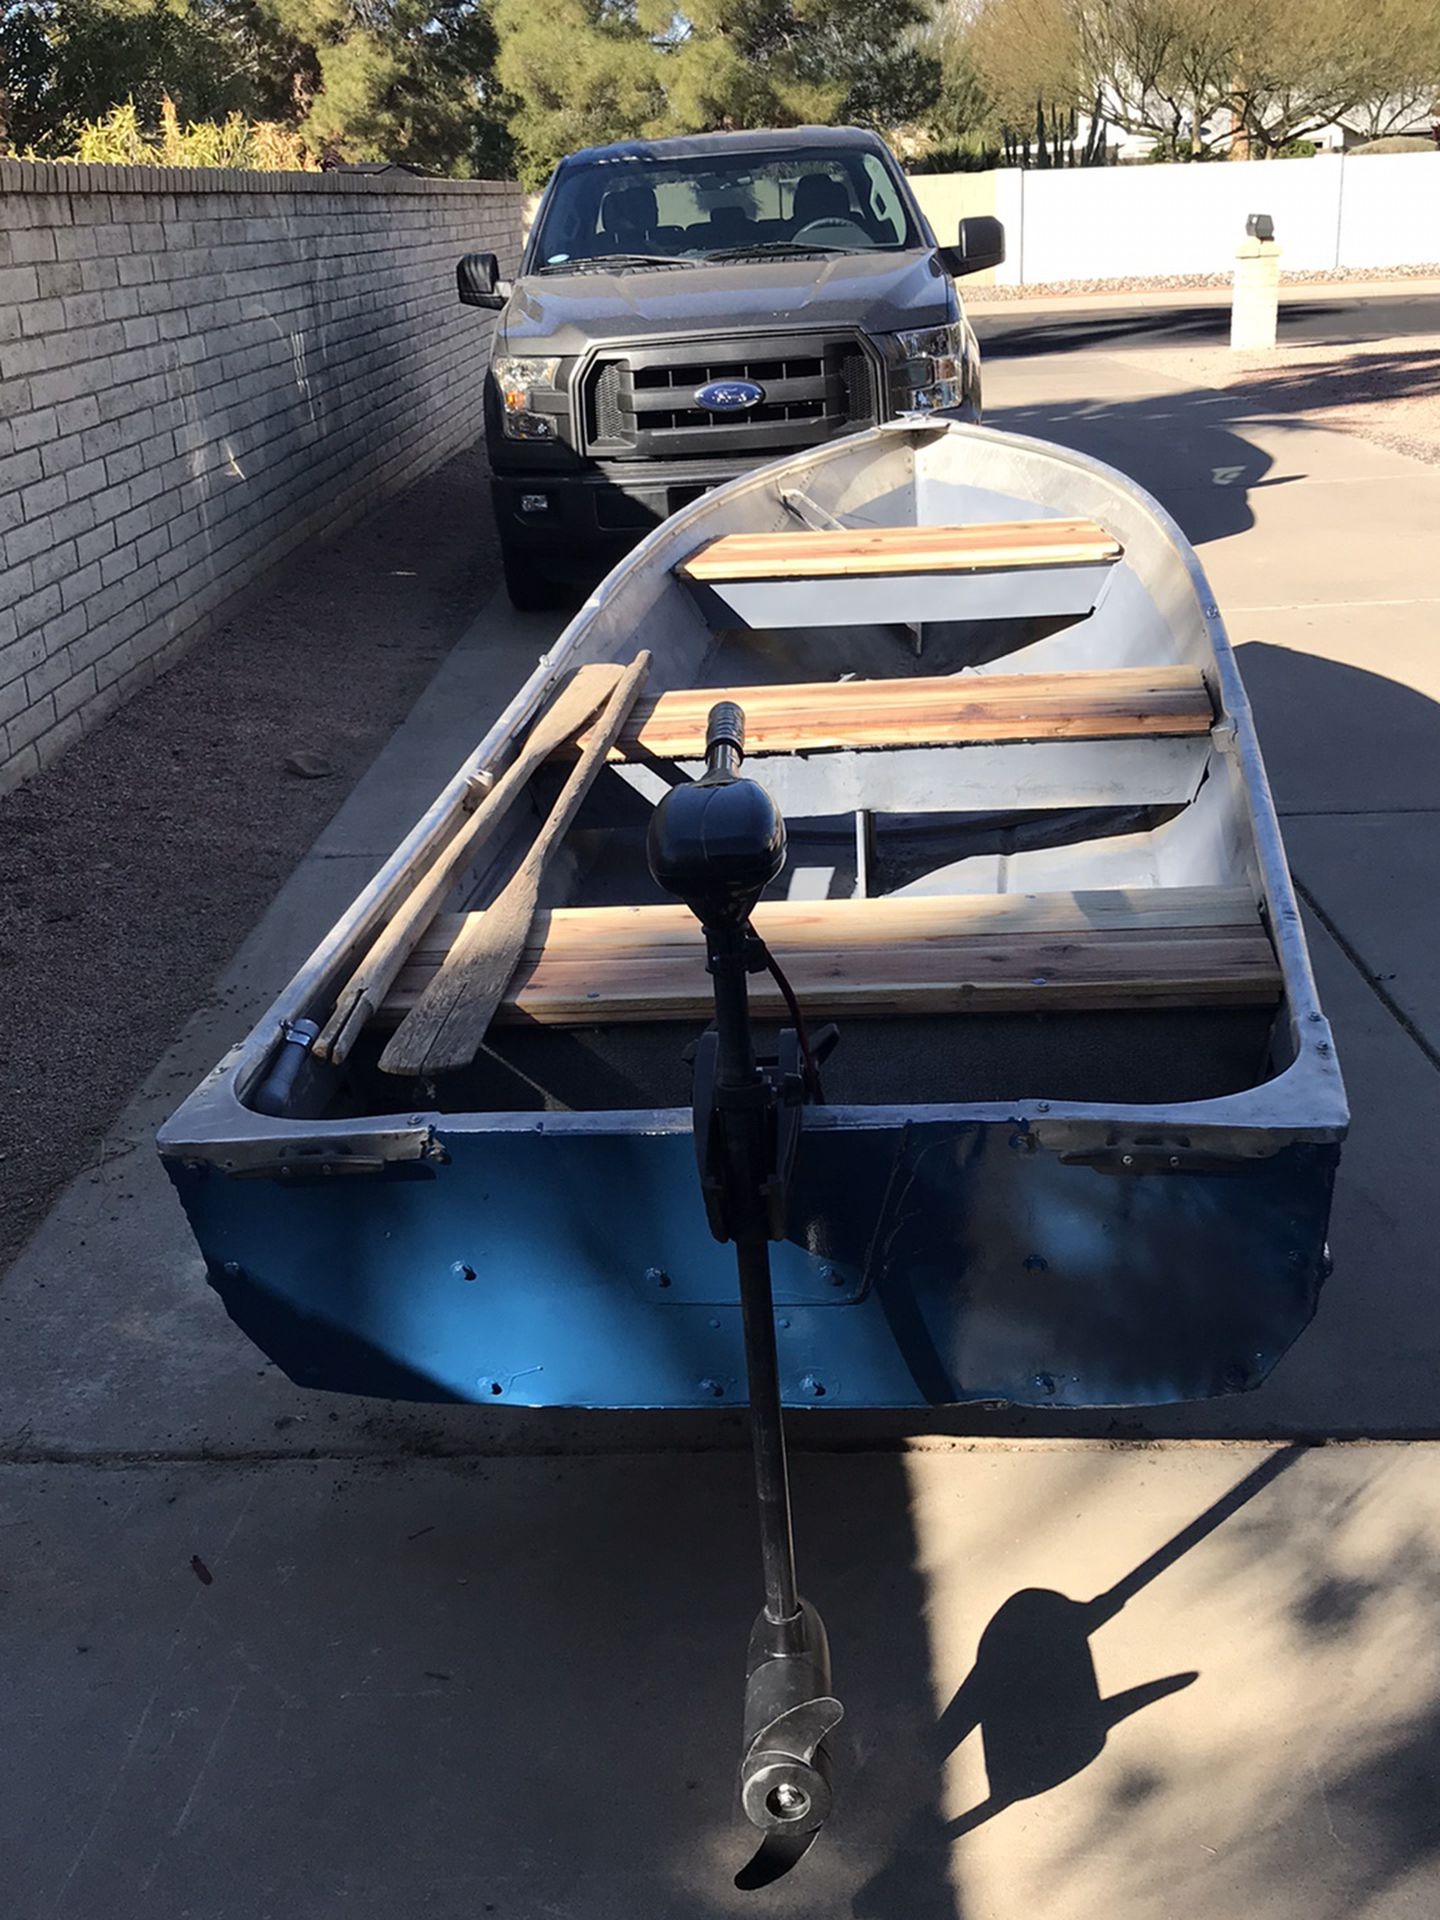 14 Foot Aluminum Boat ,30 Lb Minncota Trolling M Motor,anchor ,{url removed} Trailer .Fits In Truck Bed.$700.